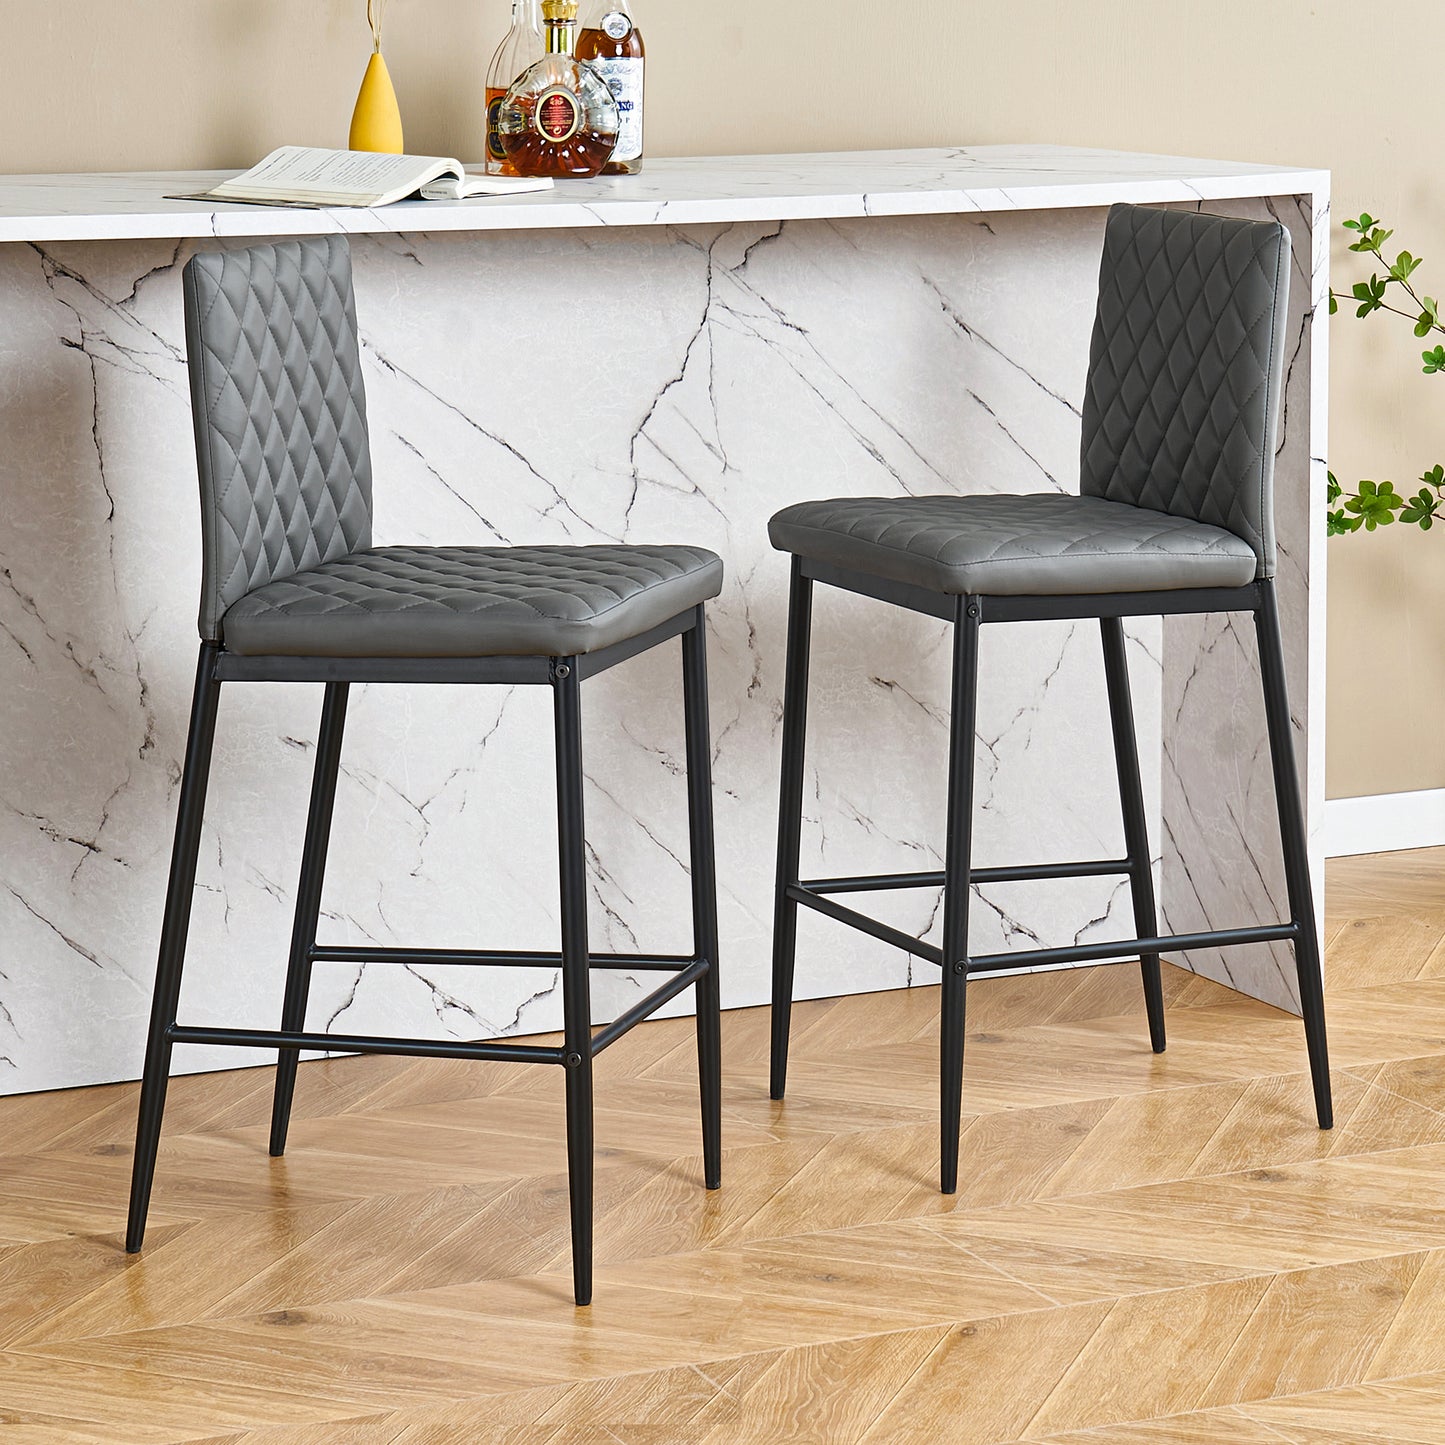 Stylish and luxurious diamond-shaped flannel design, high-quality black metal legs, stable and durable, versatile style suitable for bars, restaurants, bedroom bar chairs, (set of 2)